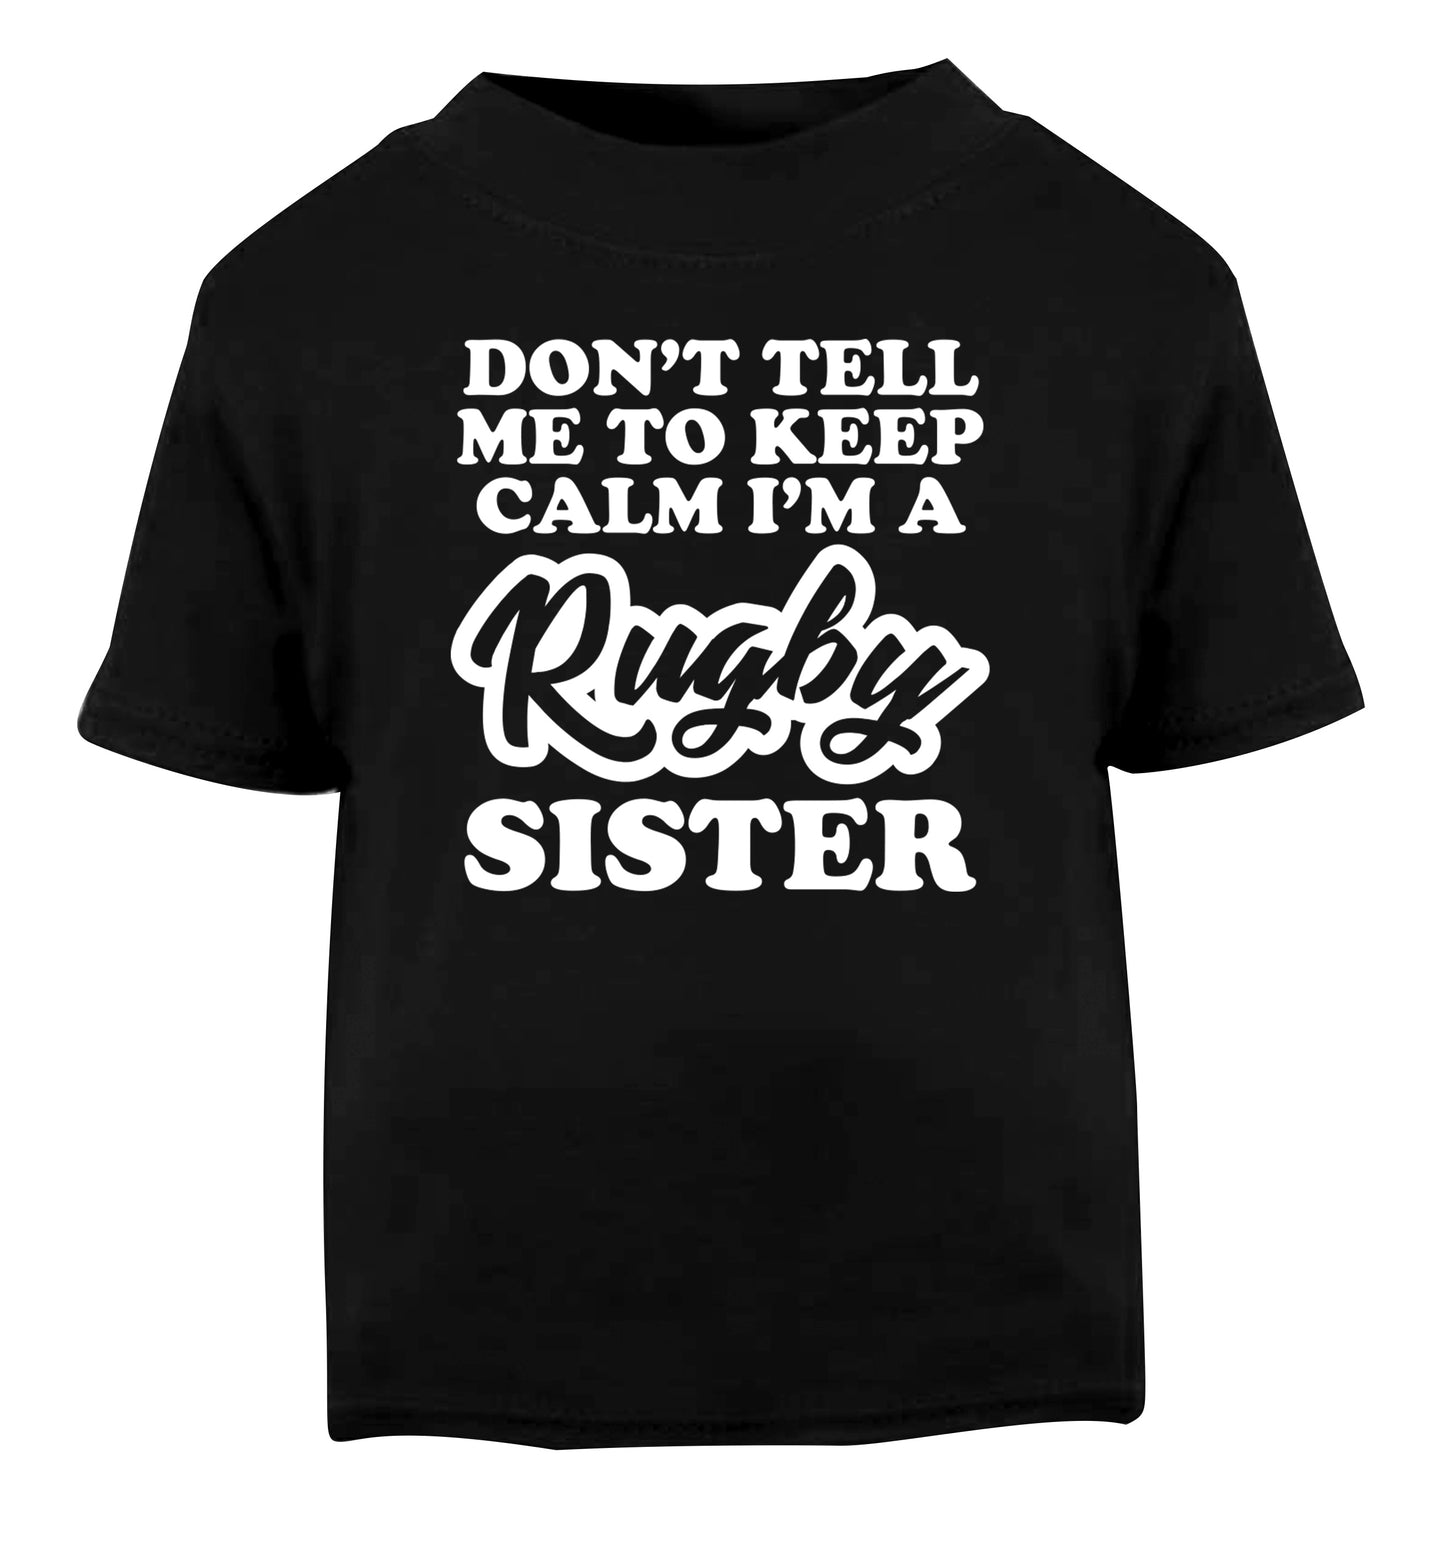 Don't tell me keep calm I'm a rugby sister Black Baby Toddler Tshirt 2 years